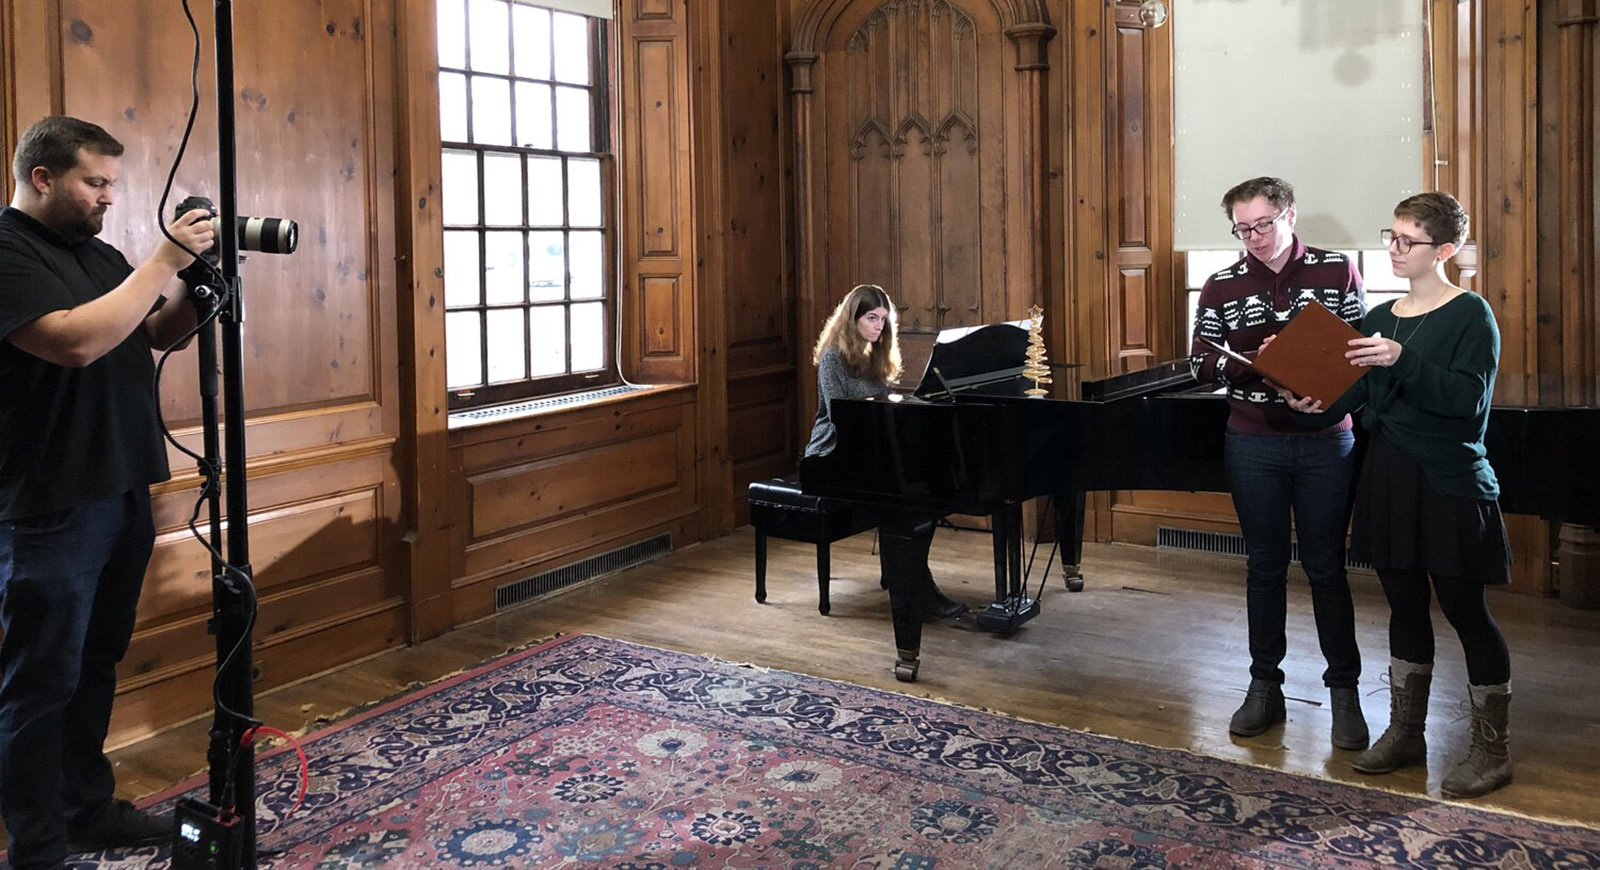 Photo of two students standing and singing, with a woman playing a grand piano behind them. They are being filmed by a person on the left of the photo.